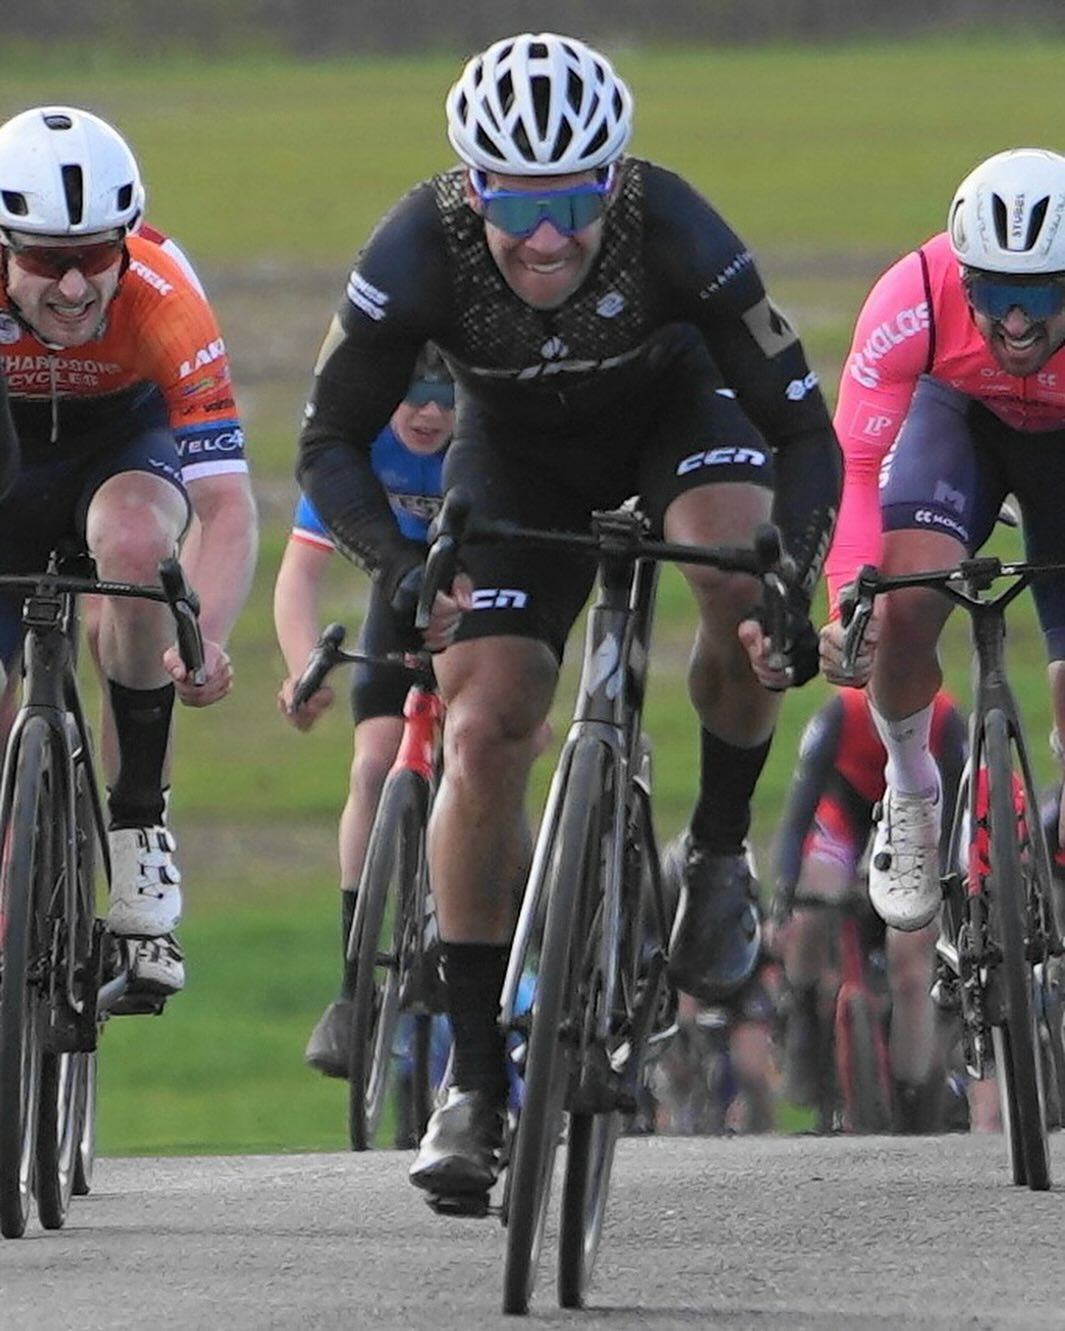 Ben Stockdale Shines at South Witham Road Race: A Second Place Triumph